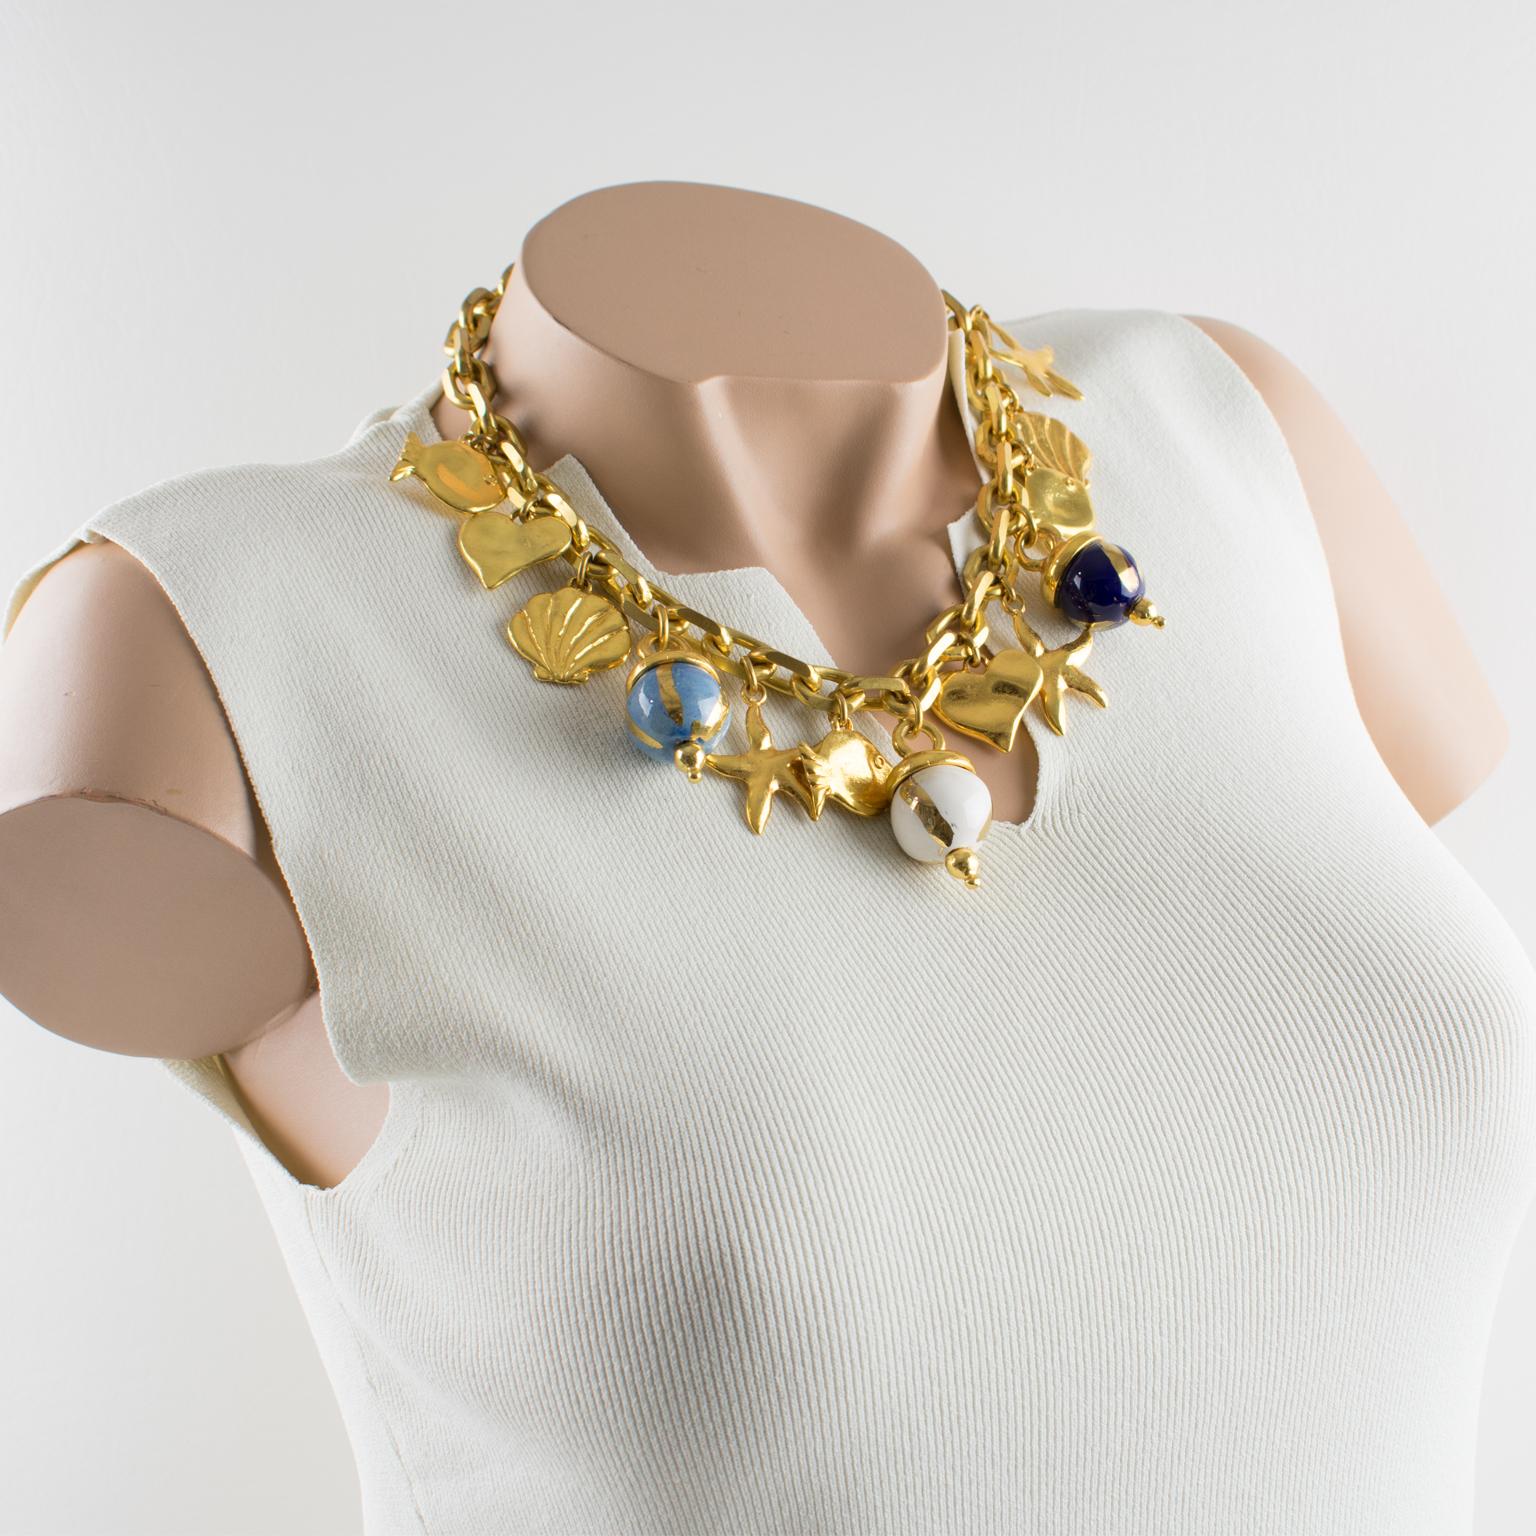 Very chic Edouard Rambaud Paris signed choker necklace. Nautical inspired design with large gilt metal chain ornate with dangling charms. Among the charms you have, ceramic beads in assorted white, cerulean blue and cobalt blue colors ornate with